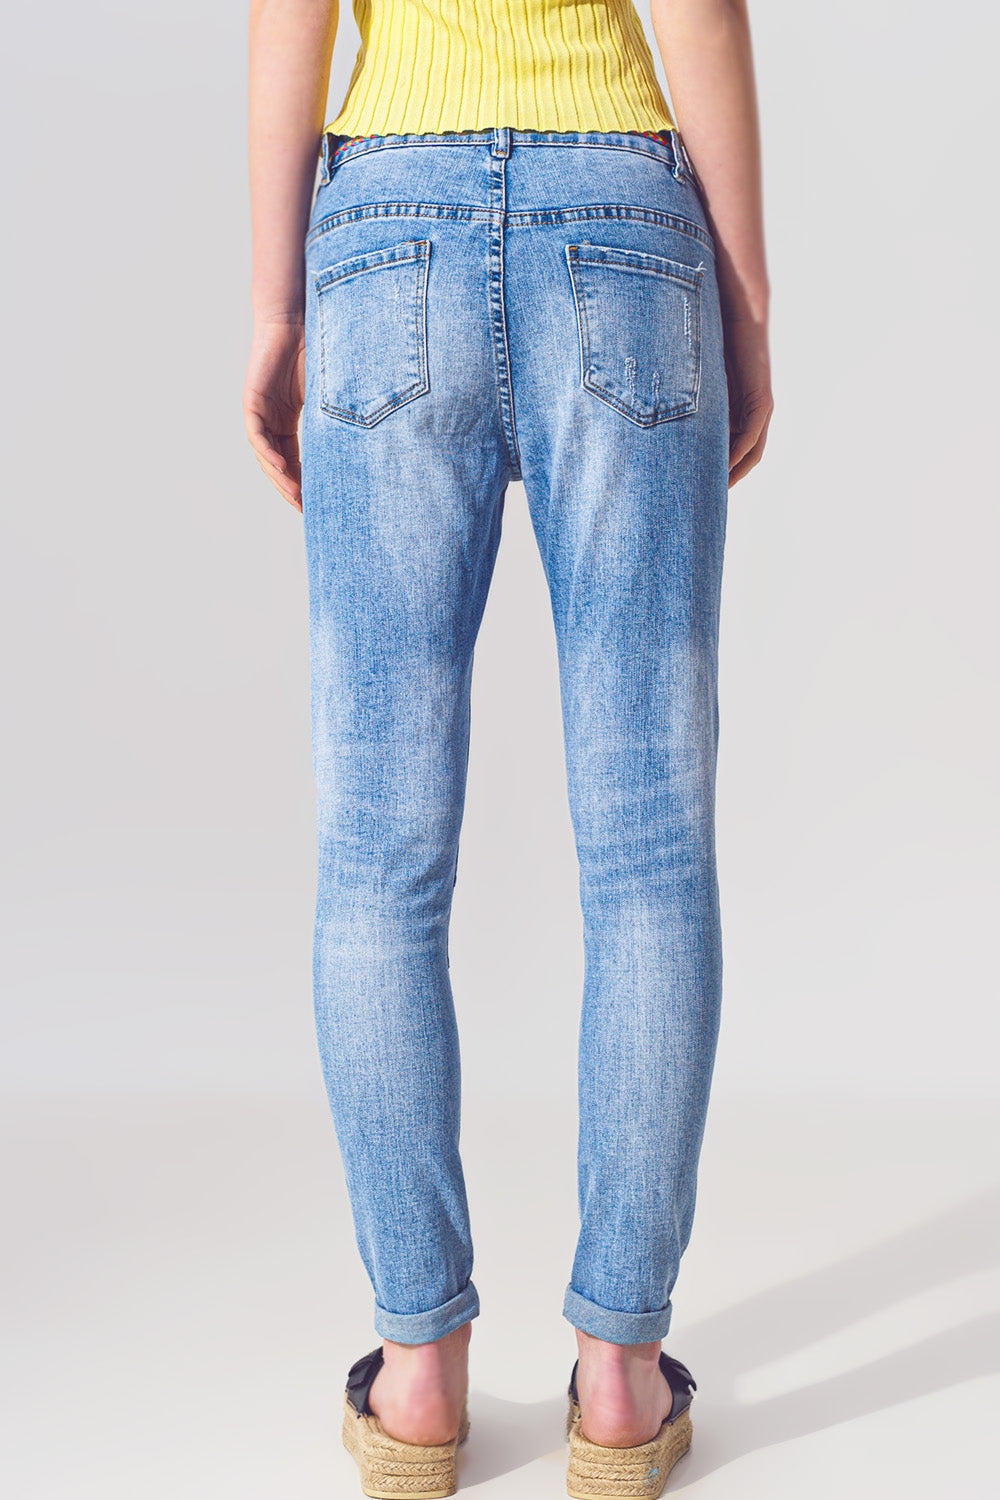 Stretch Skinny Jeans with Patches in Mid Wash and Belt Detail - Szua Store